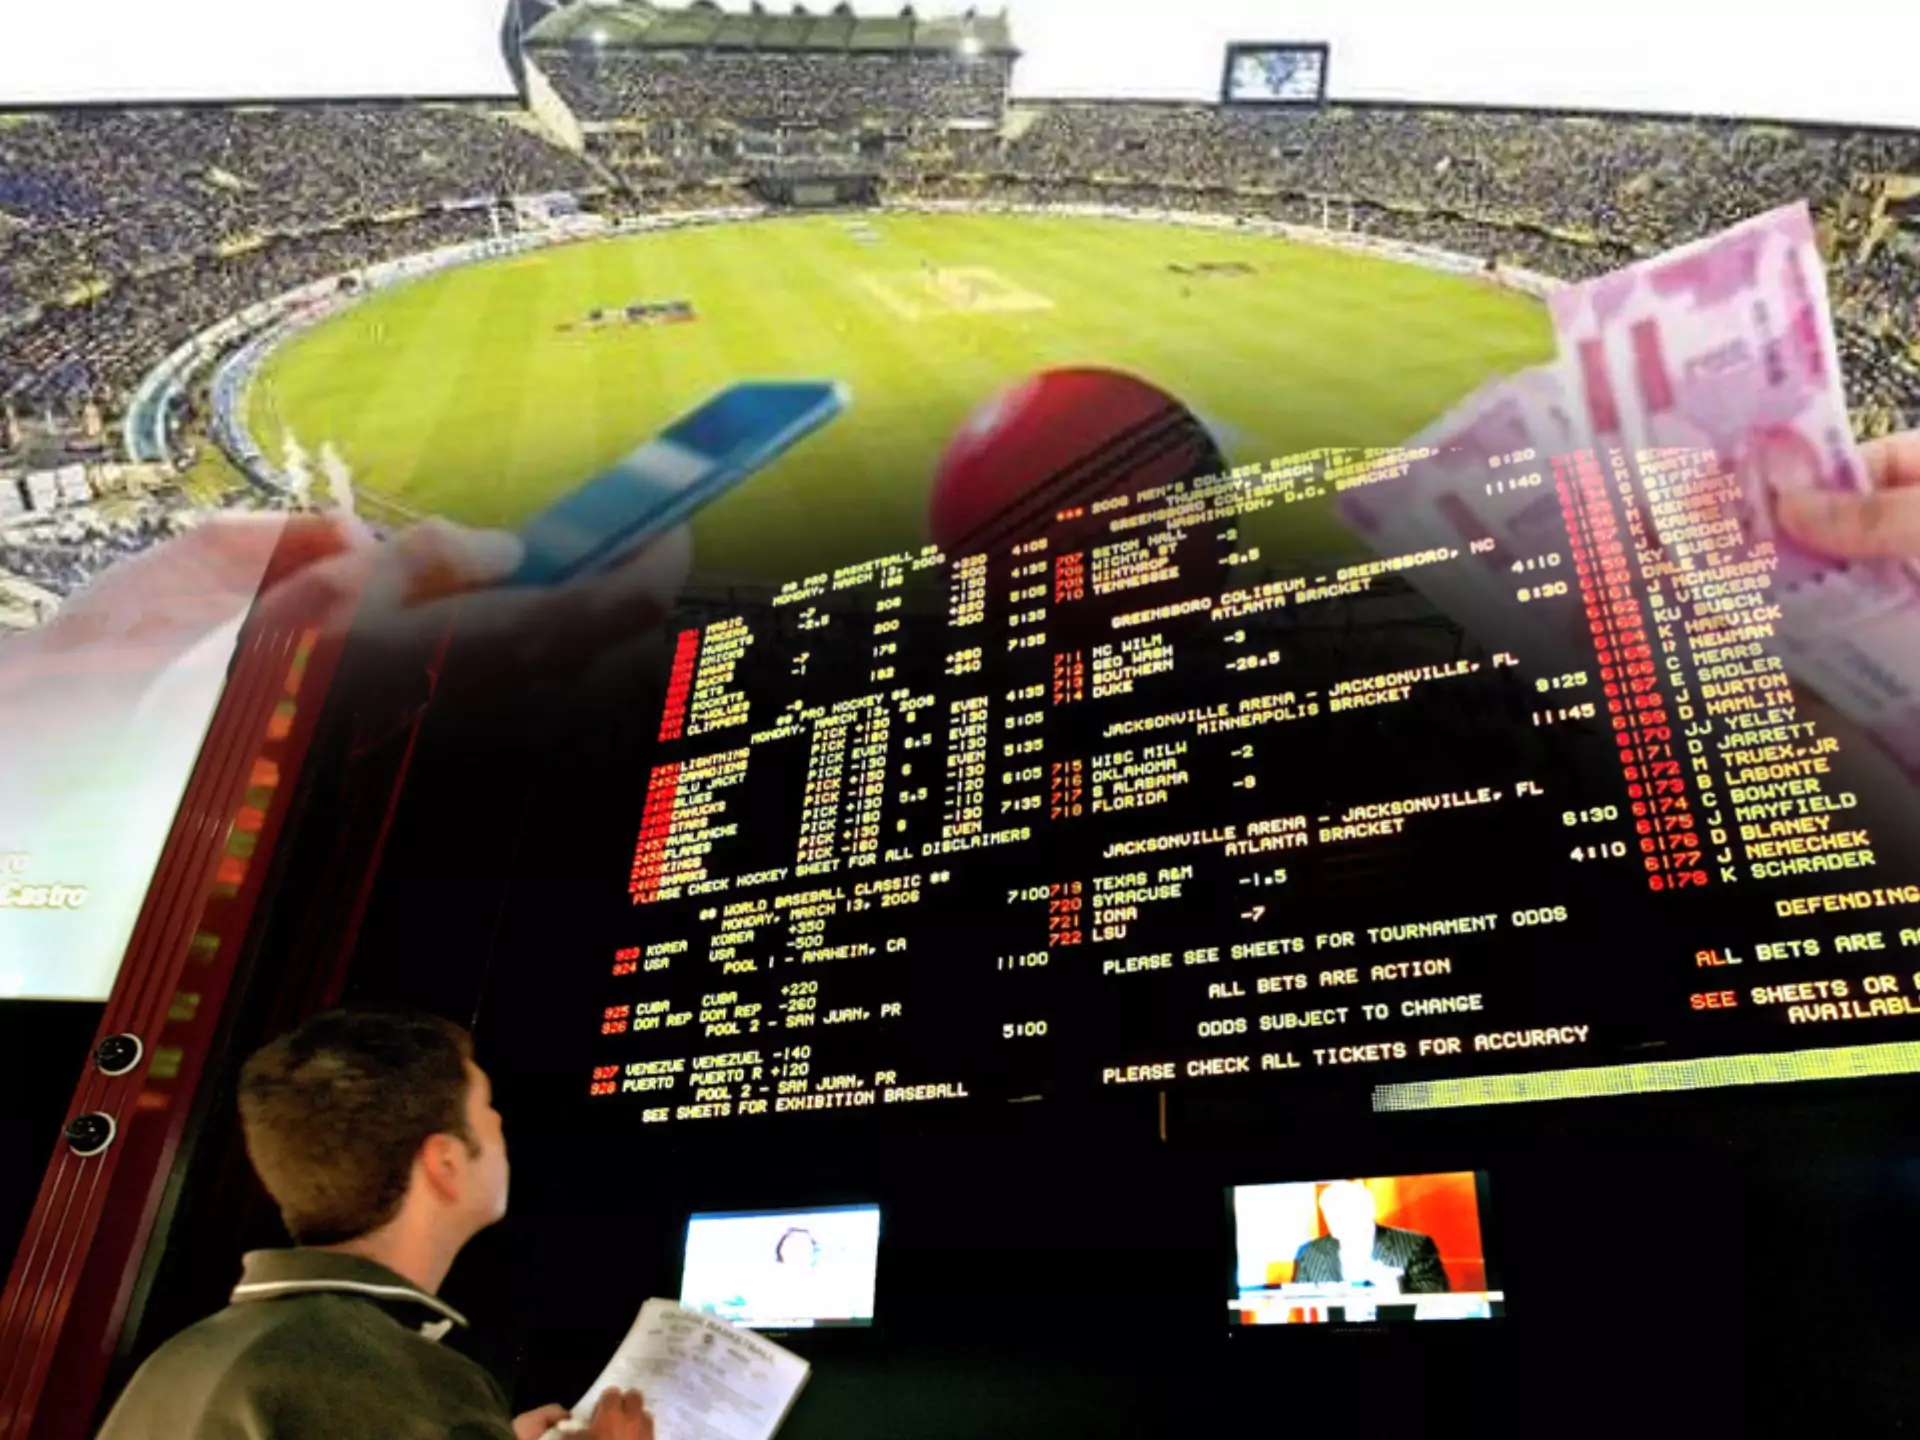 Compare different sportsbooks' odds to find the best to place a bet.